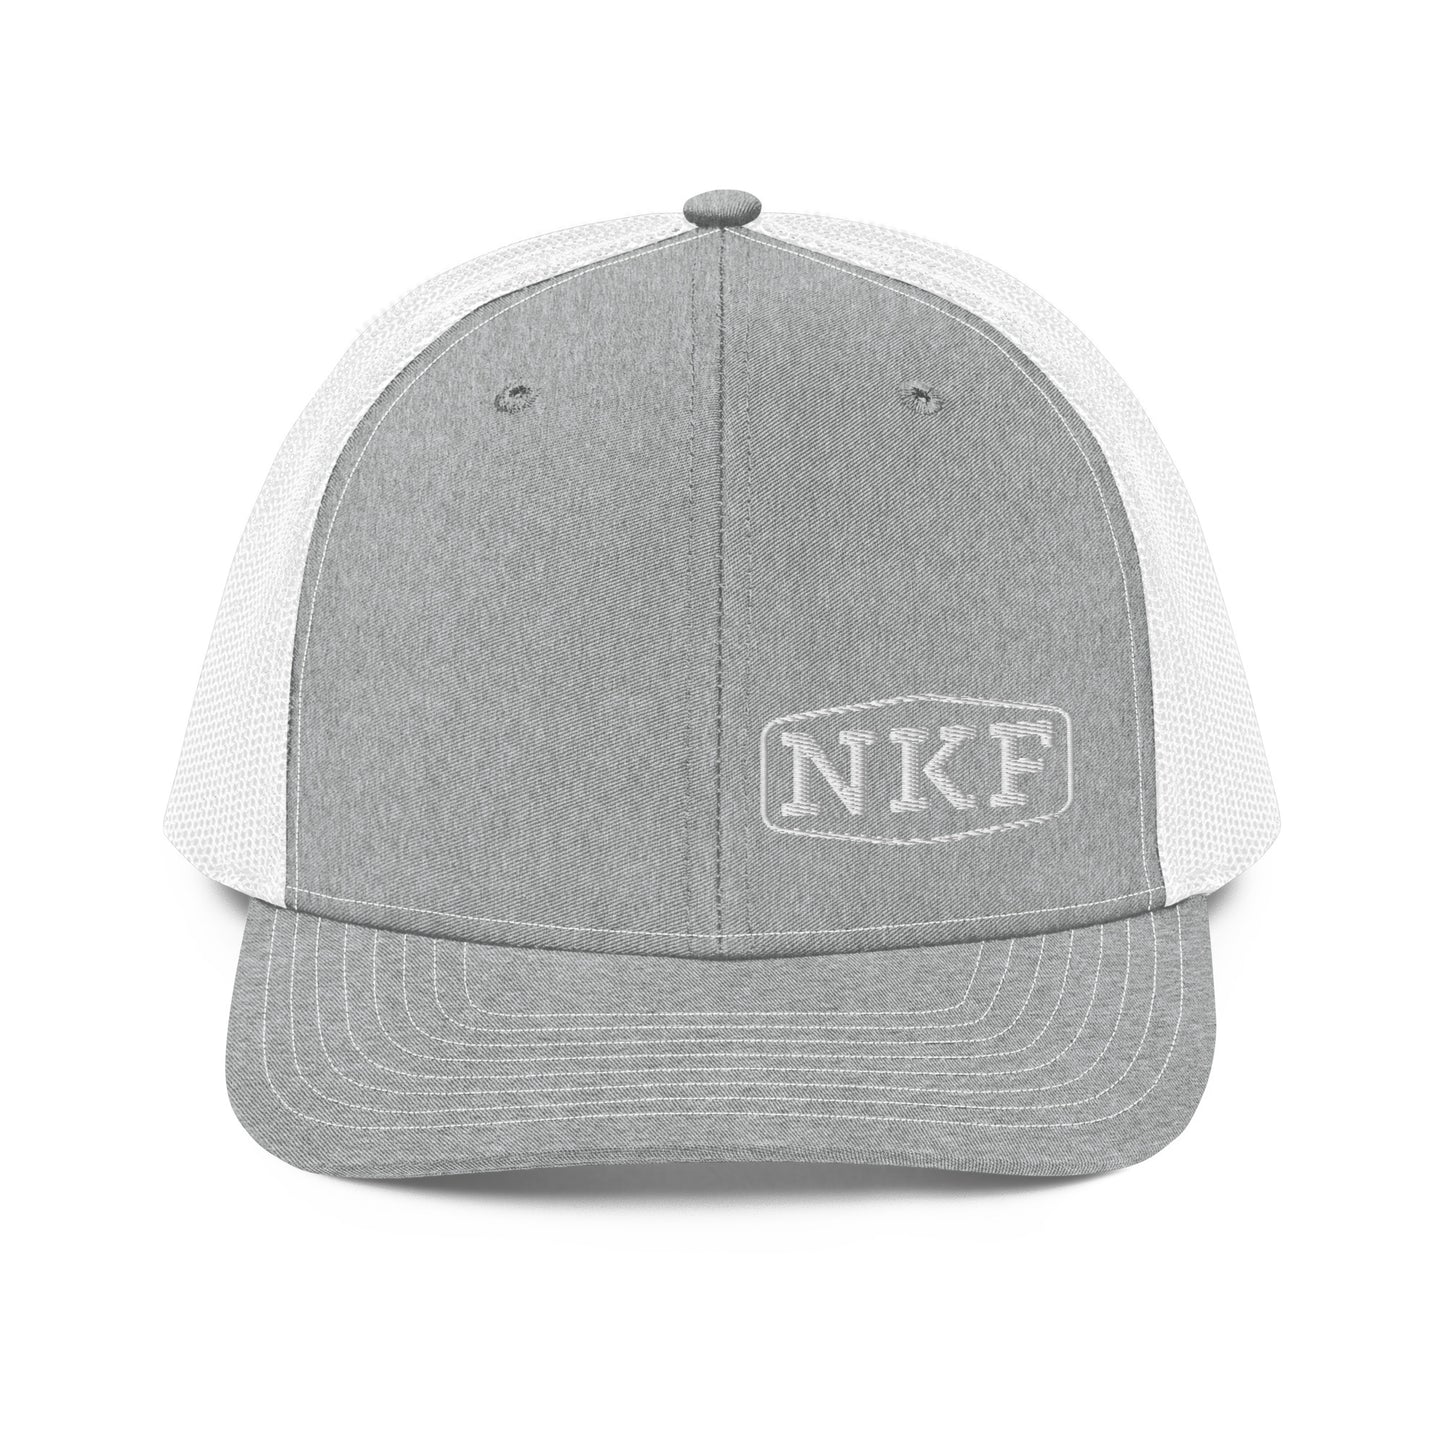 NKF Hat with White Embroidery